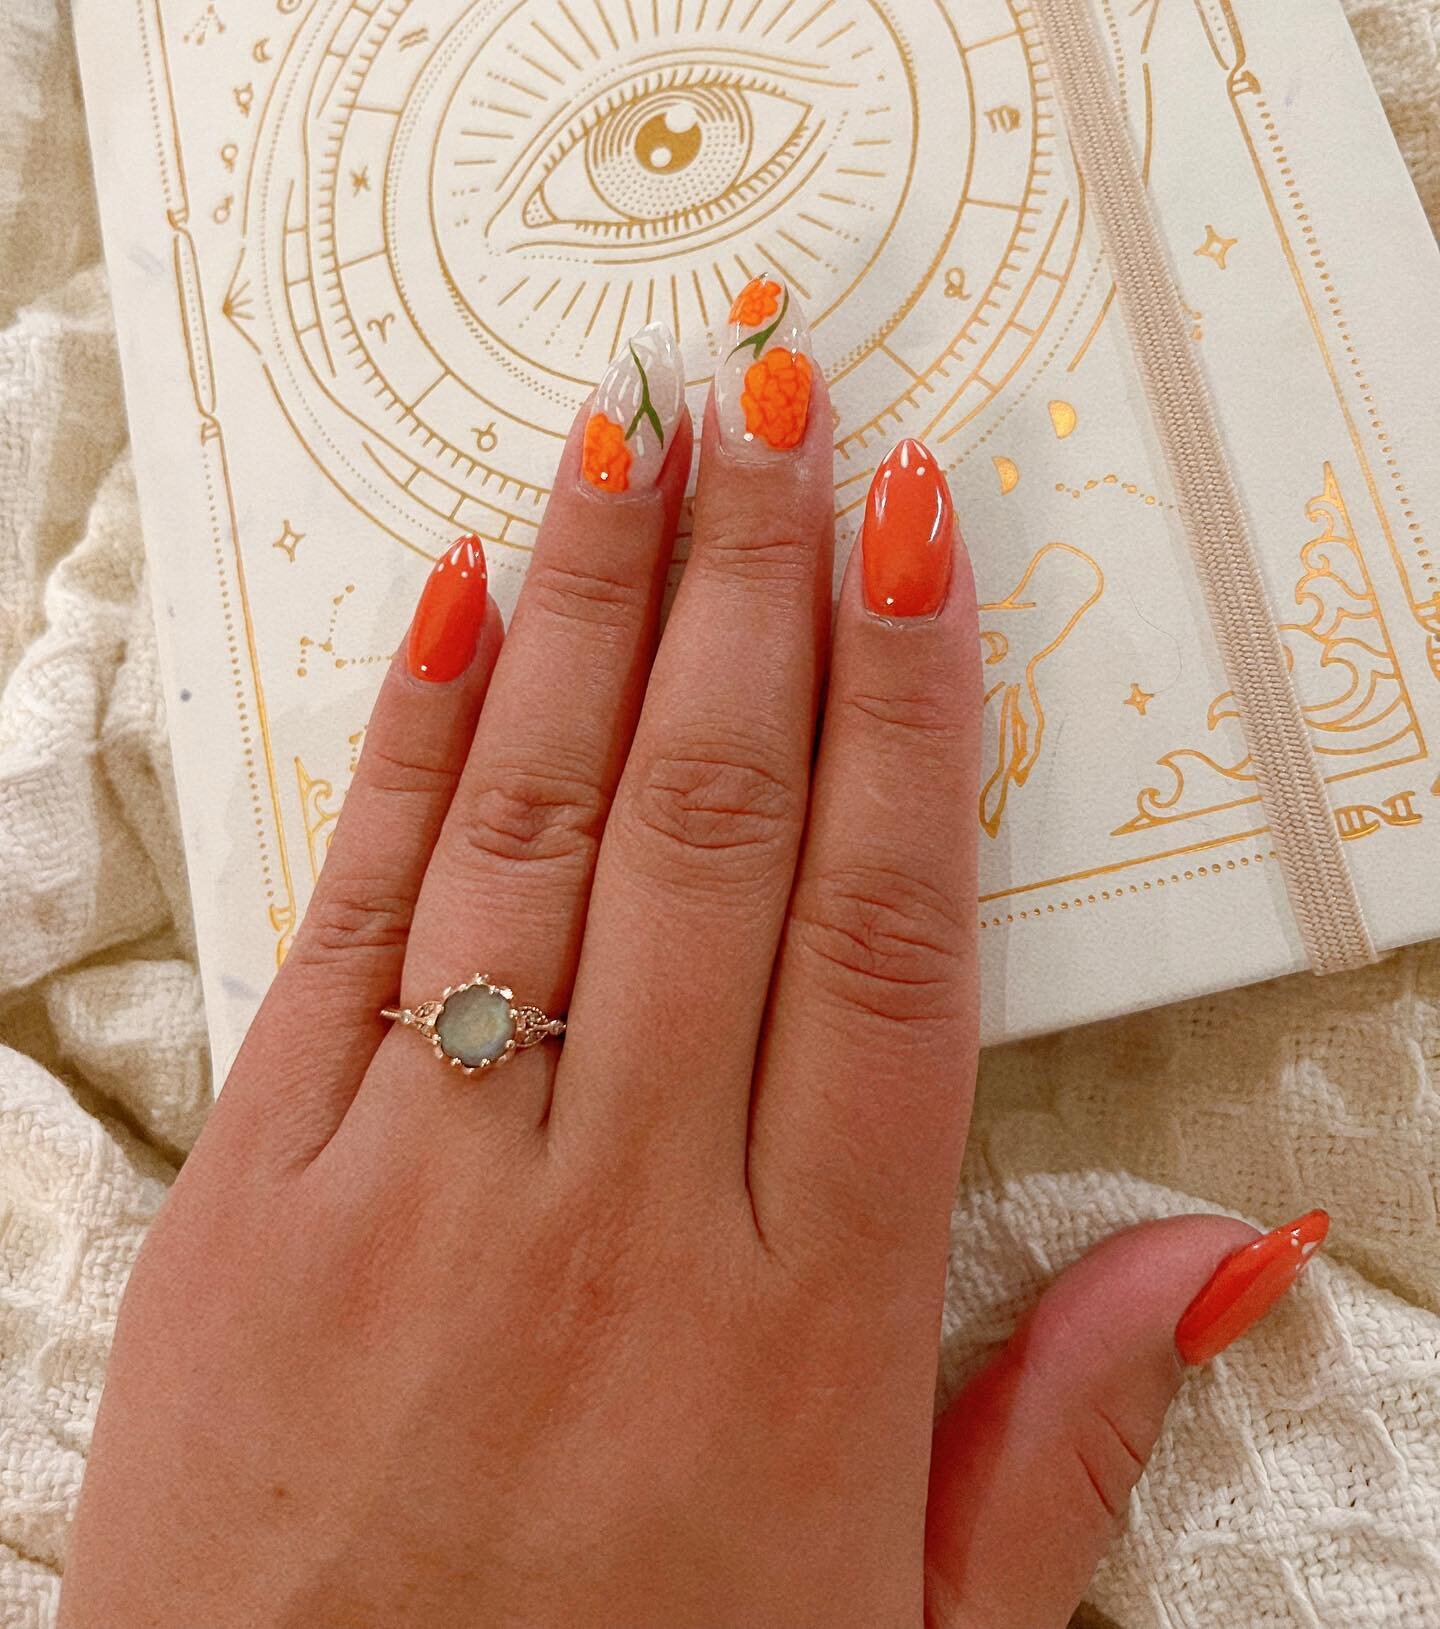 🏵🧡💀
I won&rsquo;t be setting up my altar like normal this year as we will be traveling but at least I get to bring a little piece of my altar with me in my nail art.